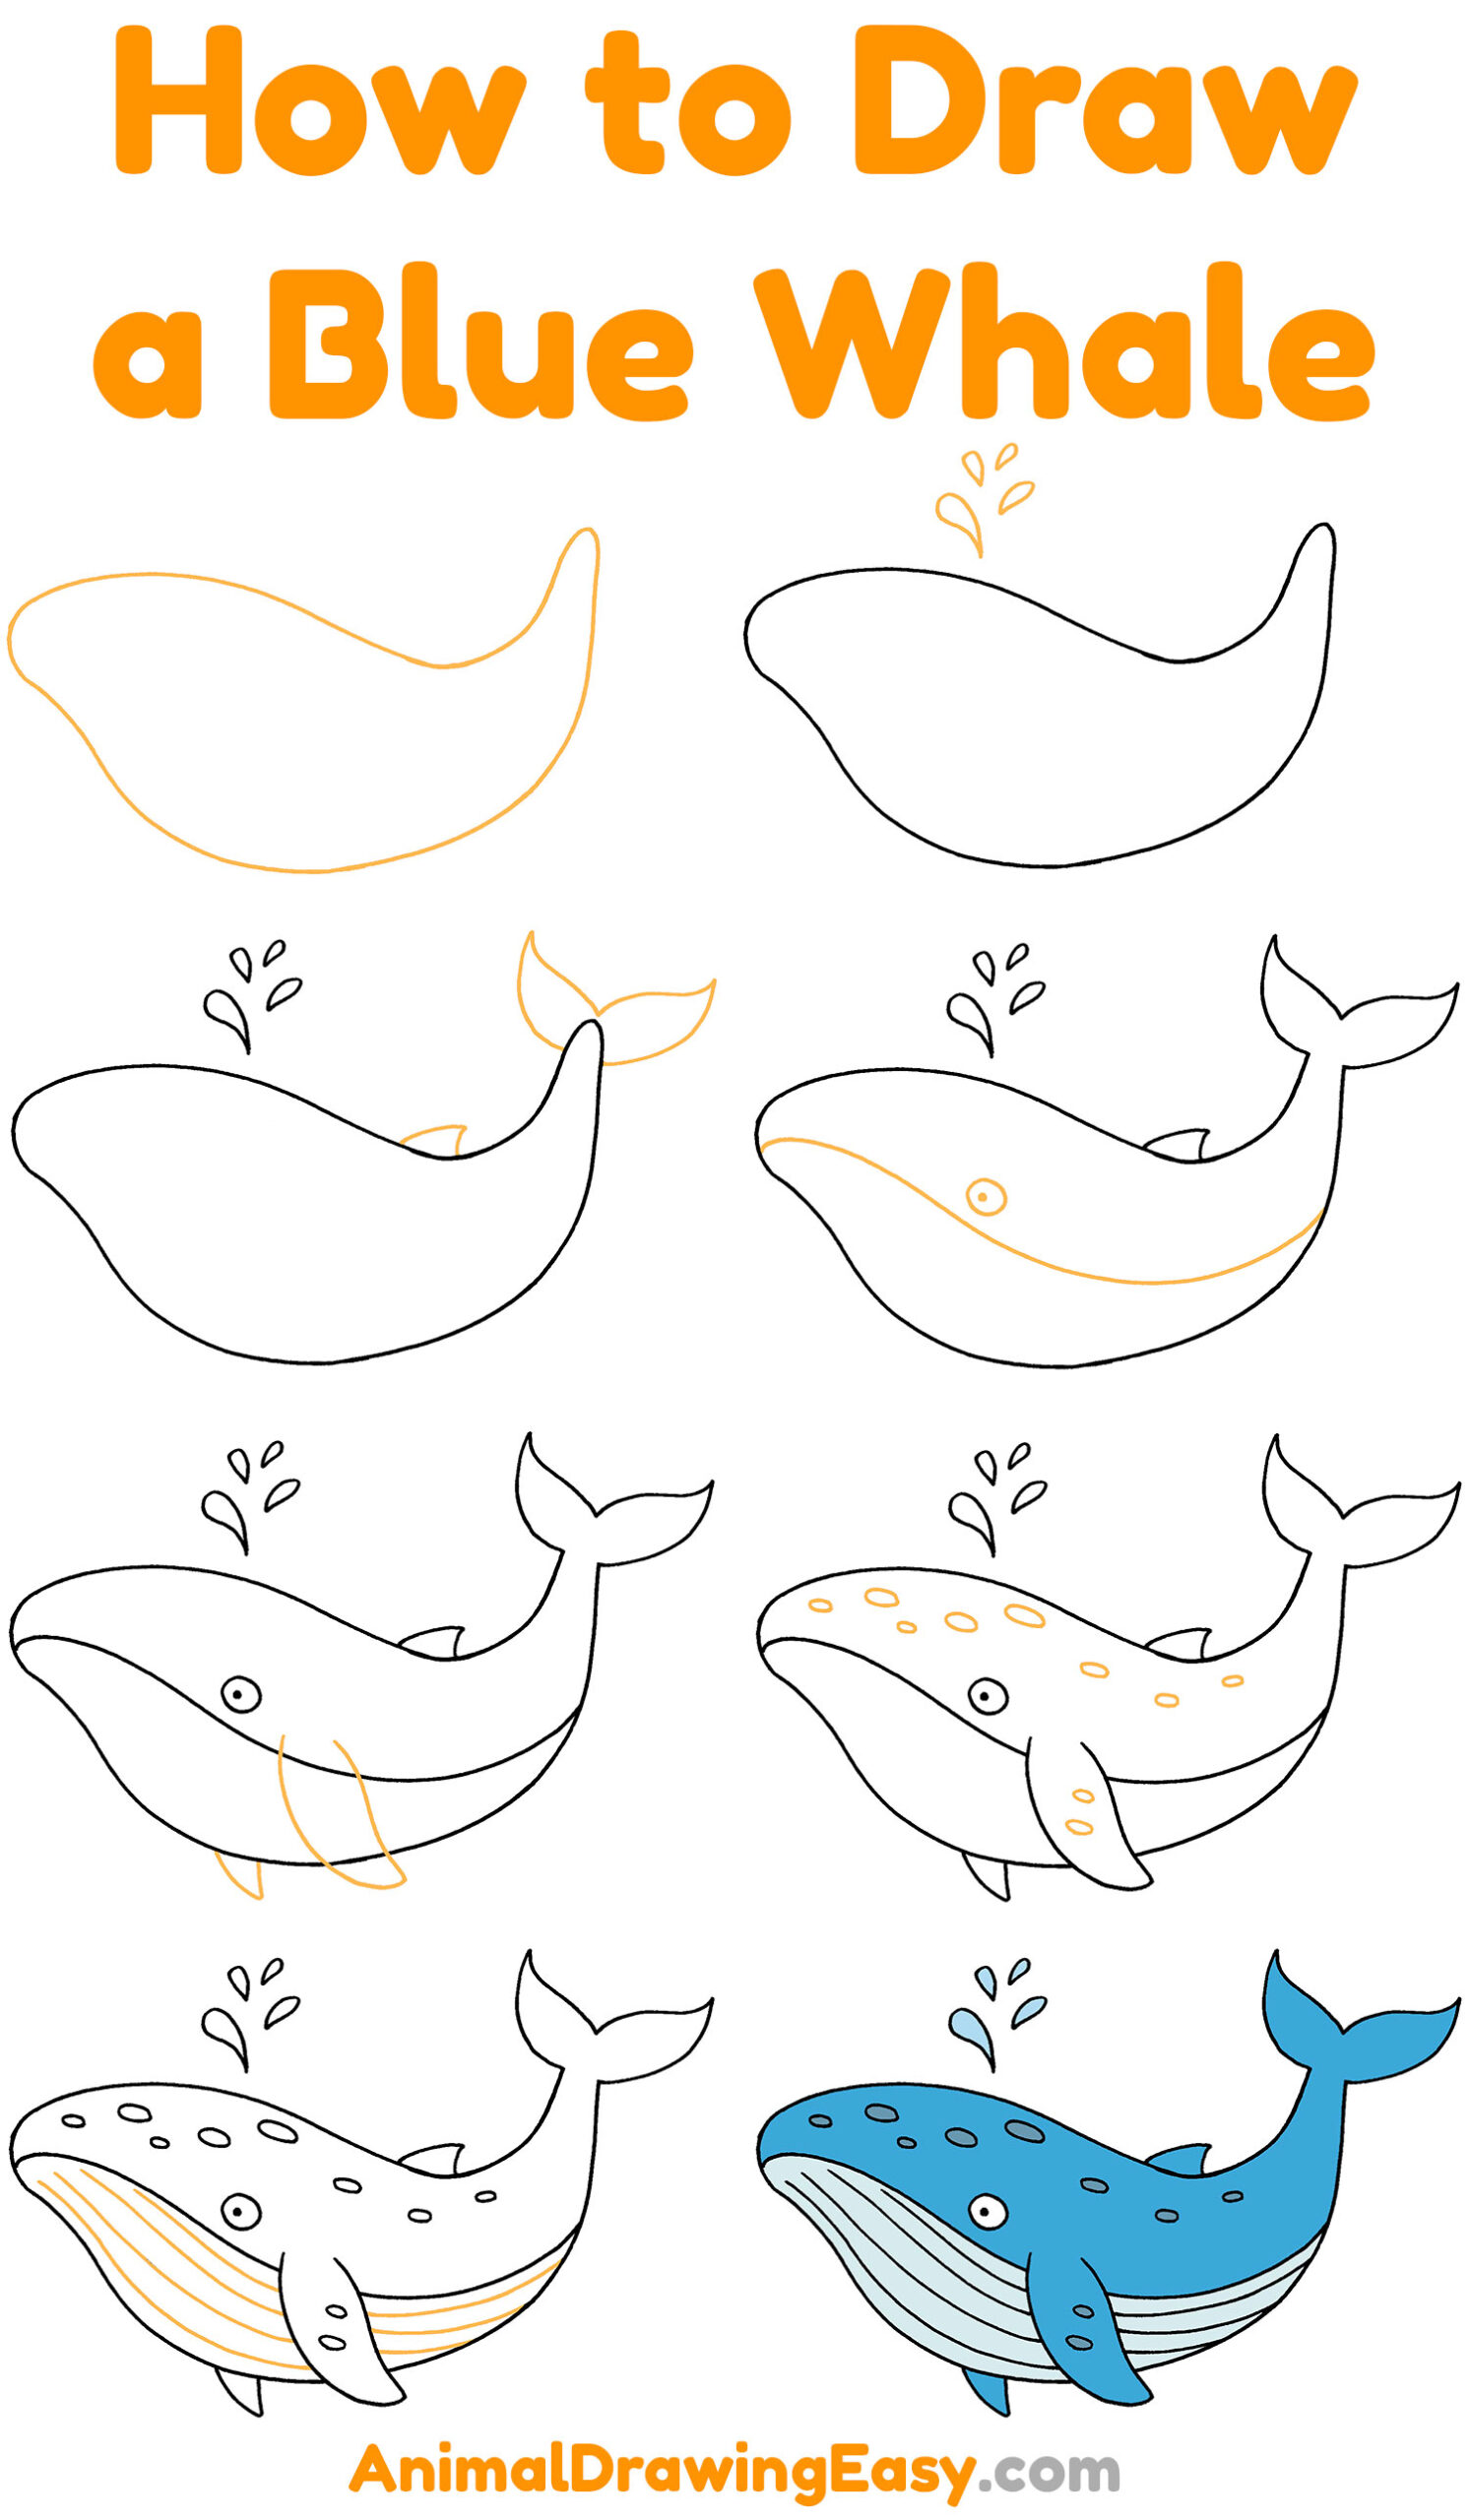 How to Draw a Blue Whale Step by Step